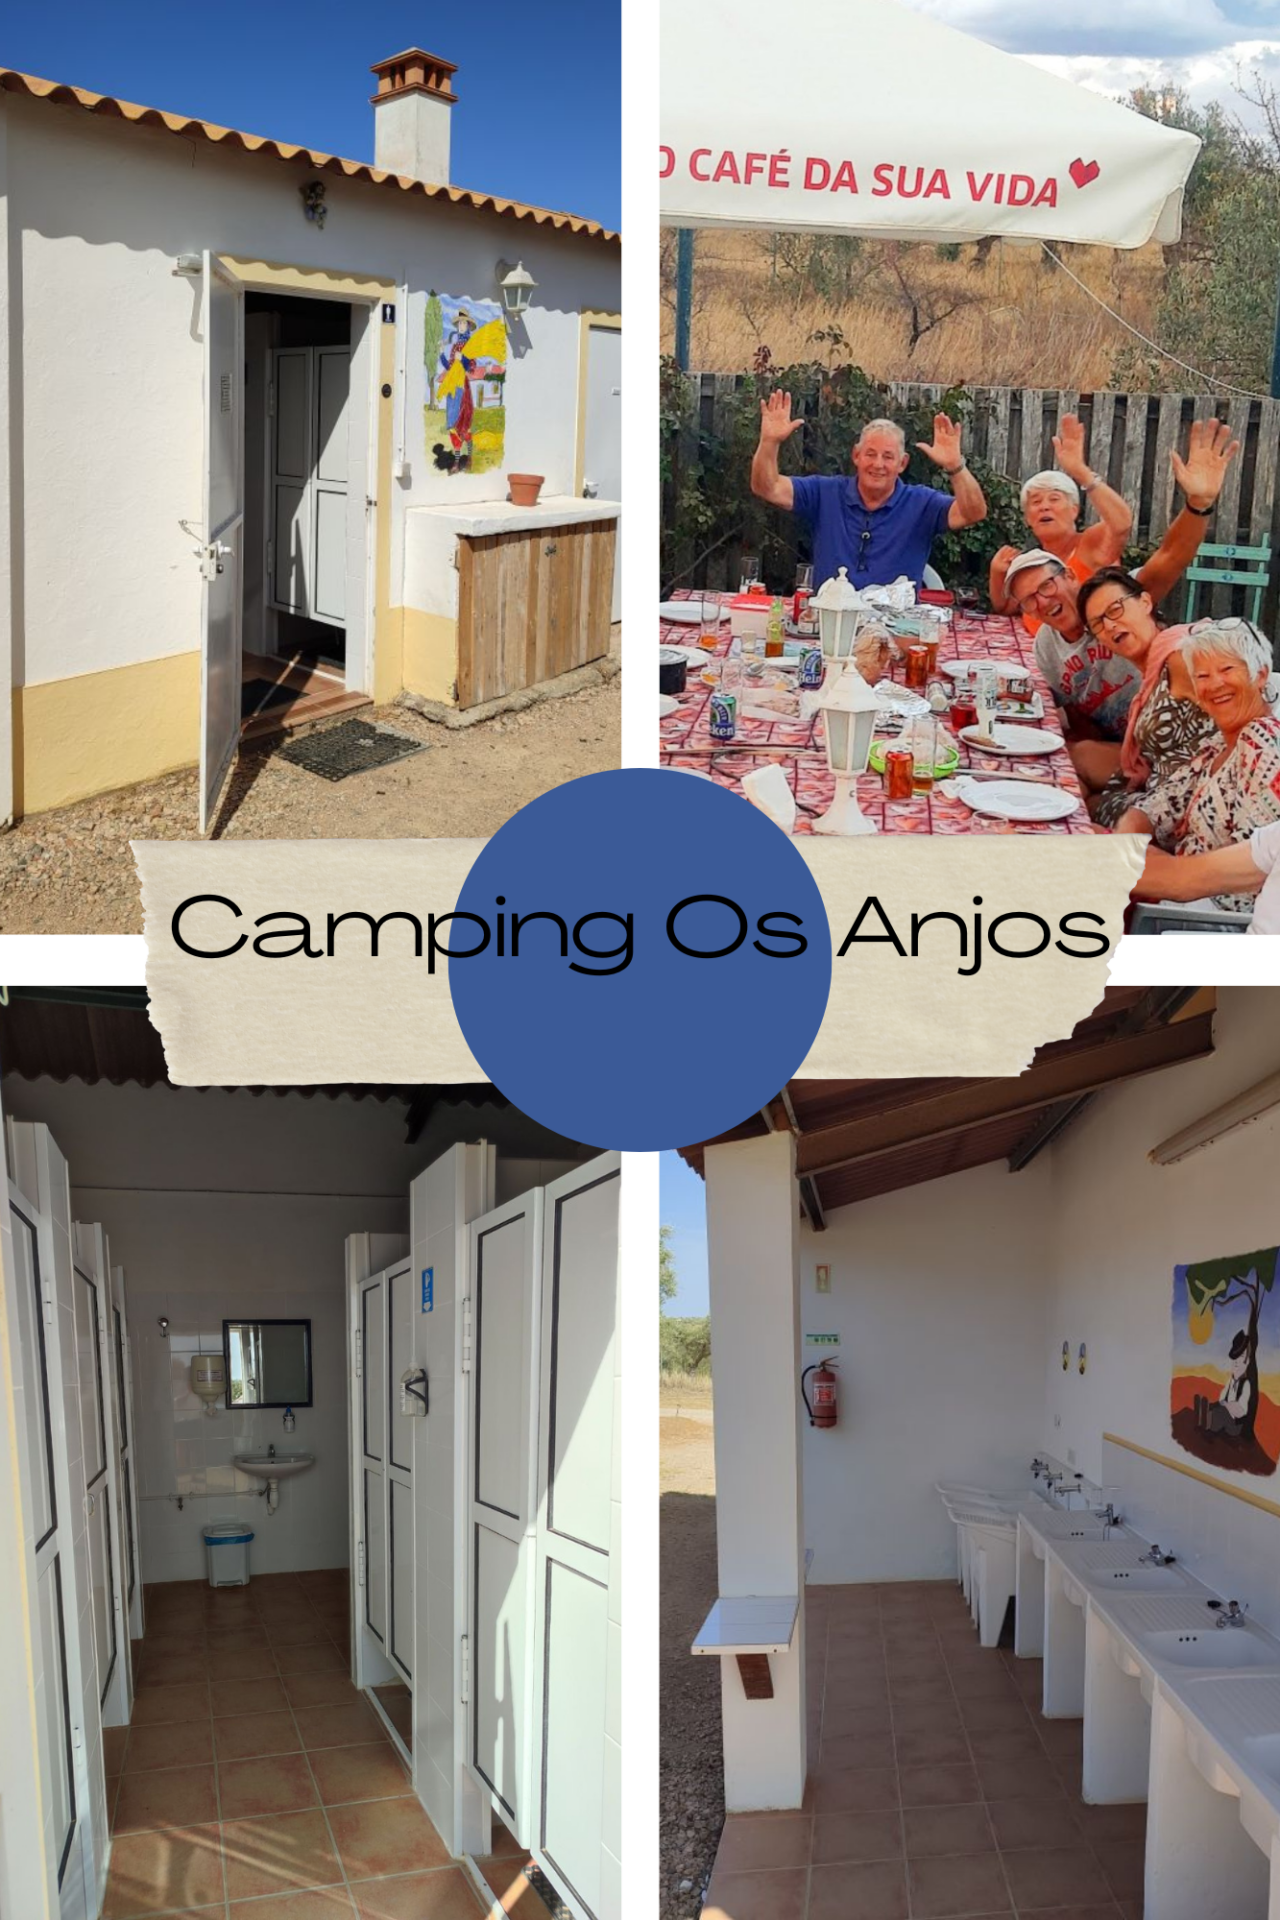 Camping Os Anjos collage